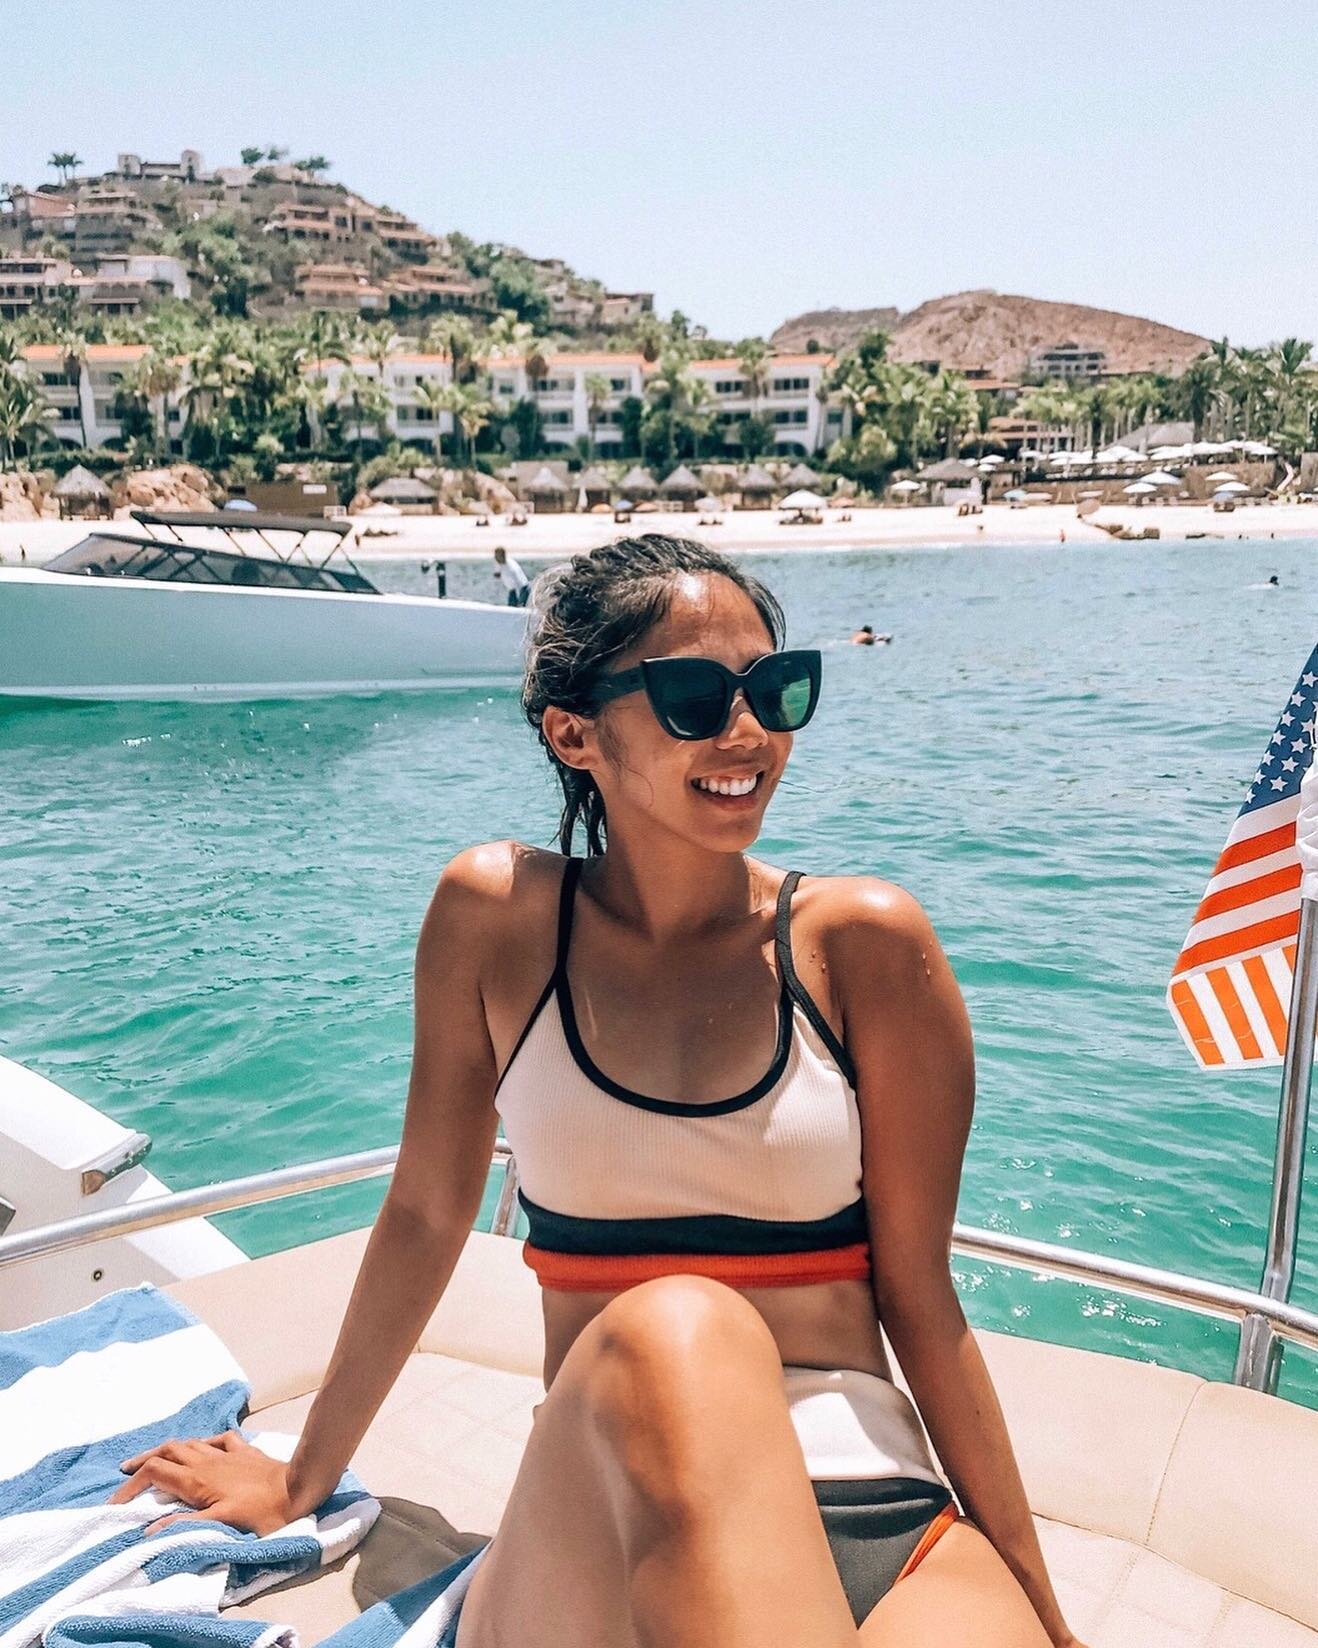 Taking a dip in the sea is the best way to cool off! 🌊😎⛵️
⠀⠀⠀⠀⠀⠀⠀⠀⠀
Curious to know what activities and tours are available in Mexico? Check out my latest blog post for things to see and do in Cabo right now. Link in bio. 

//⁣⁣⁣⁣⁣⁣⁣⁣ 
⁣⁣⁣⁣⁣⁣⁣⁣
#da